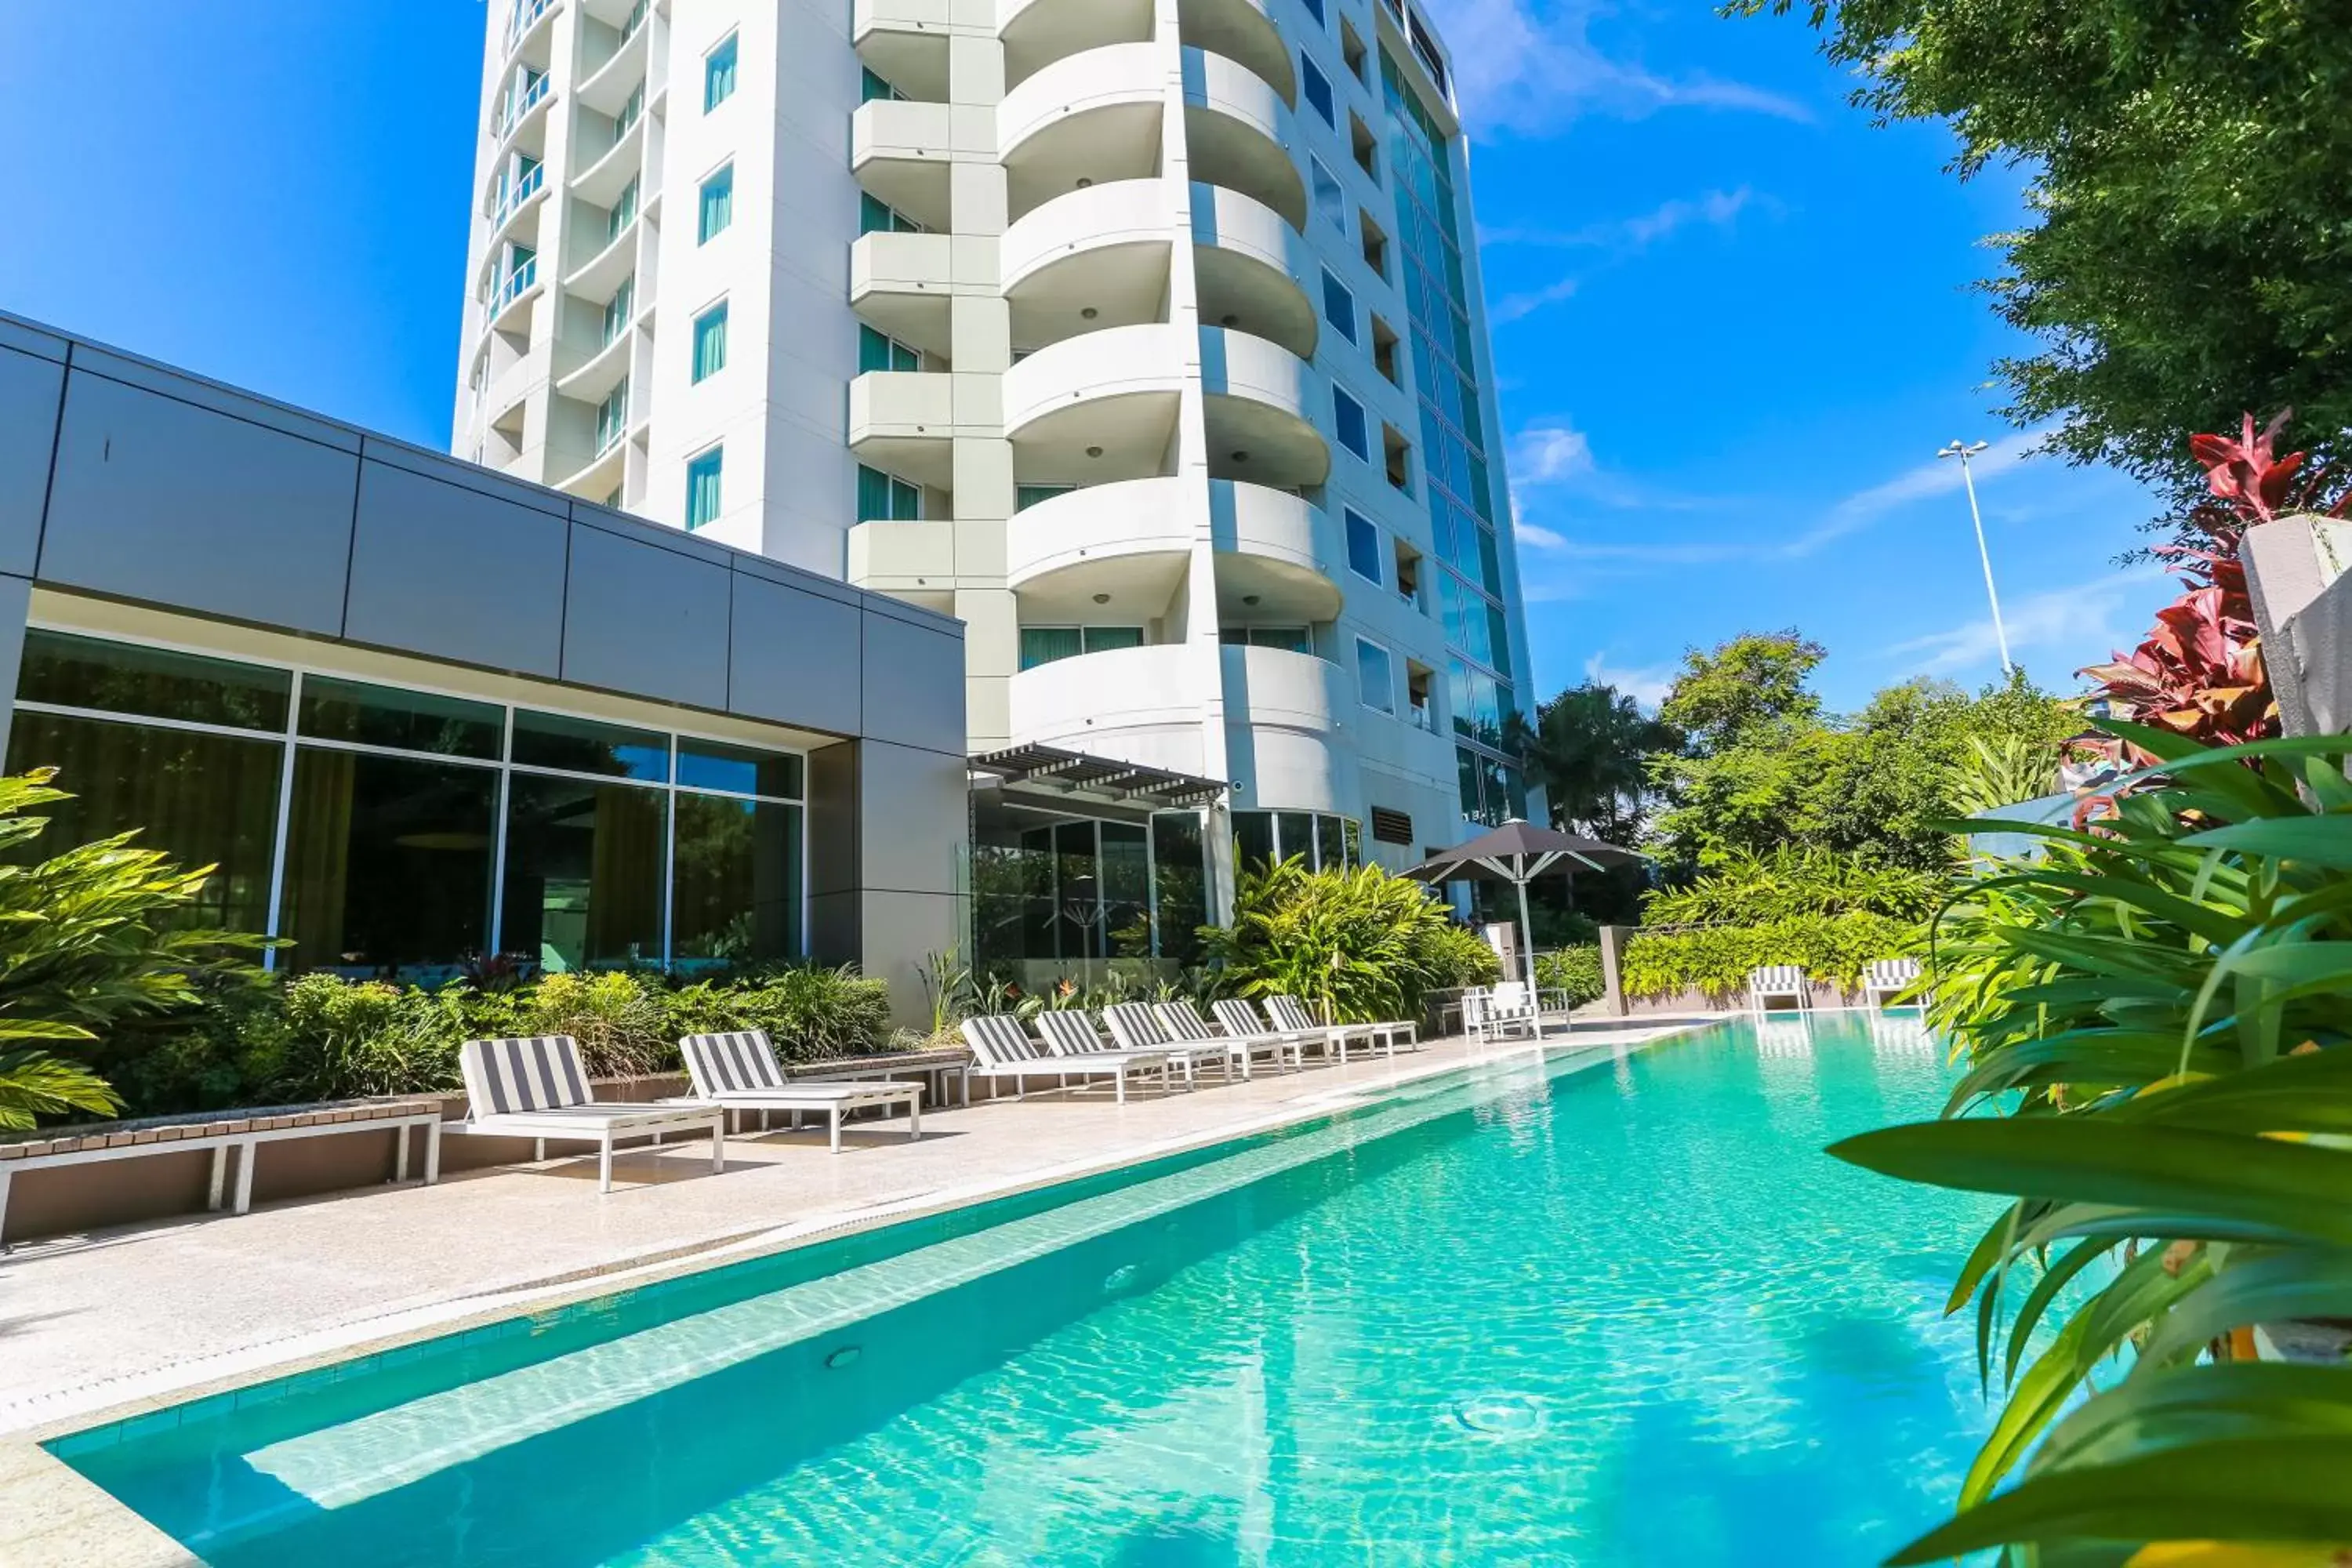 Property building, Swimming Pool in The Point Brisbane Hotel